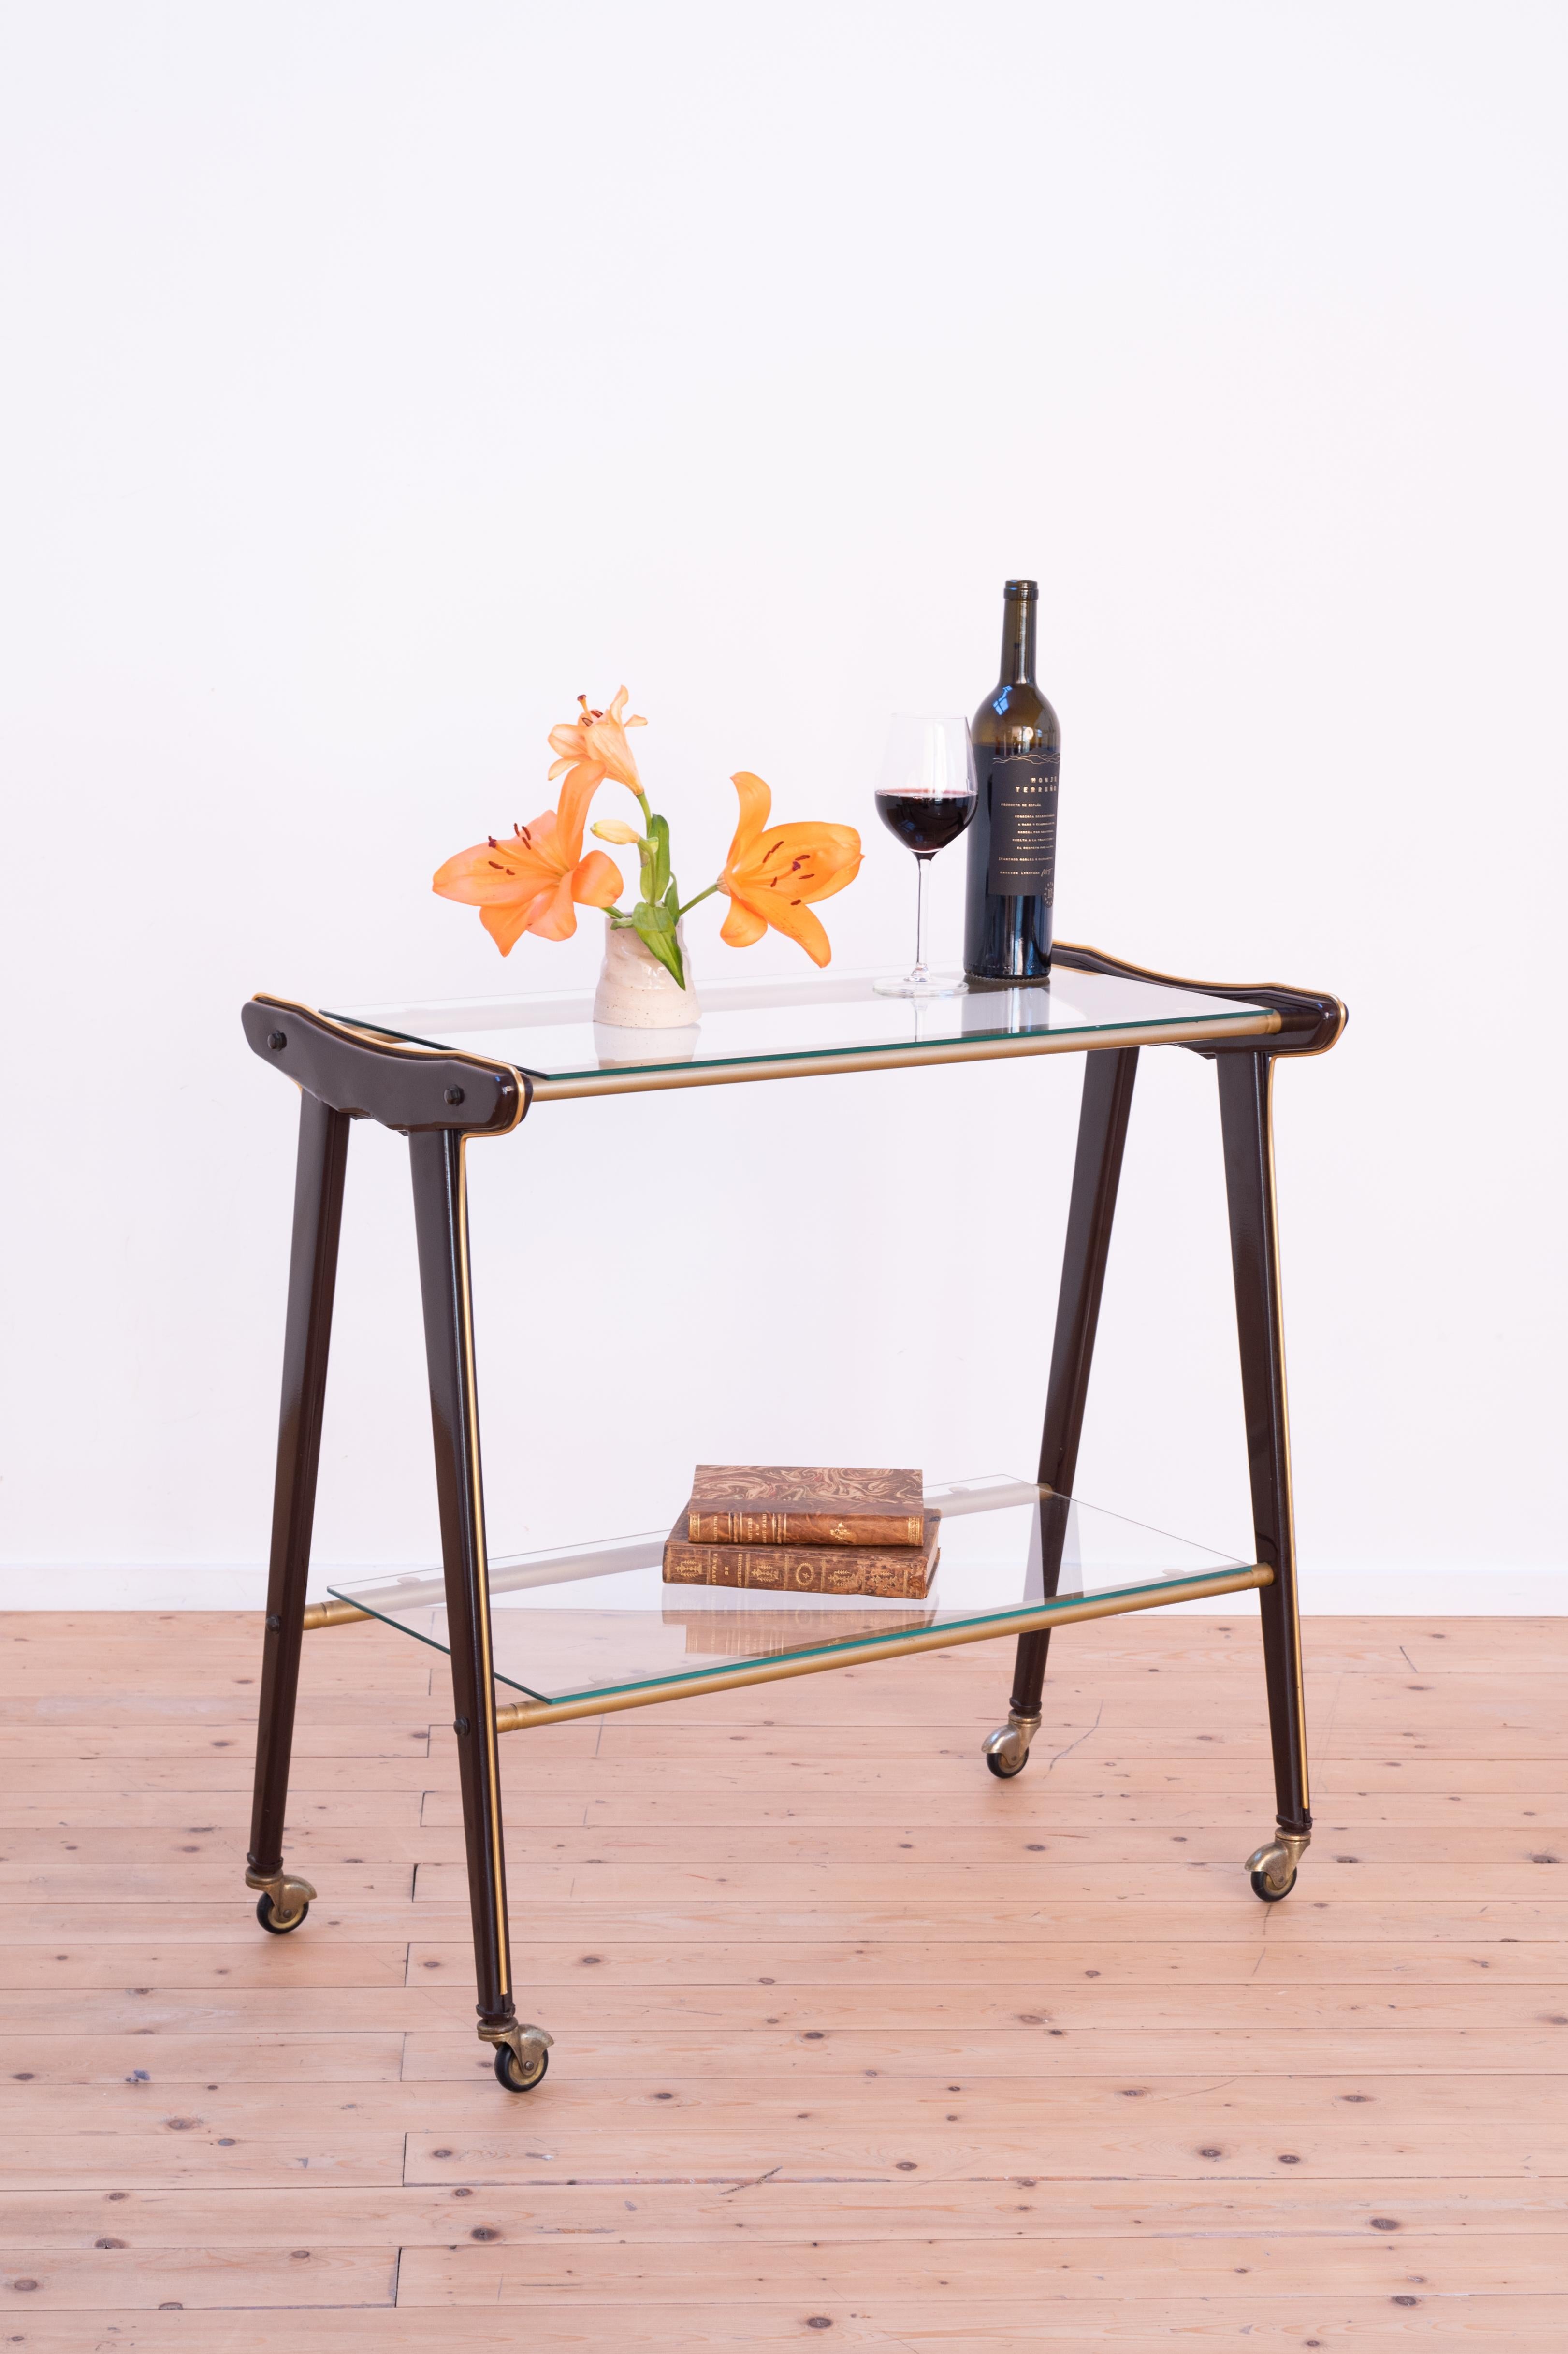 Very elegant vintage 1960s bar cart on wheels, with 2 glass shelves. 

Beautiful detail in brass on the legs of the bar cart.